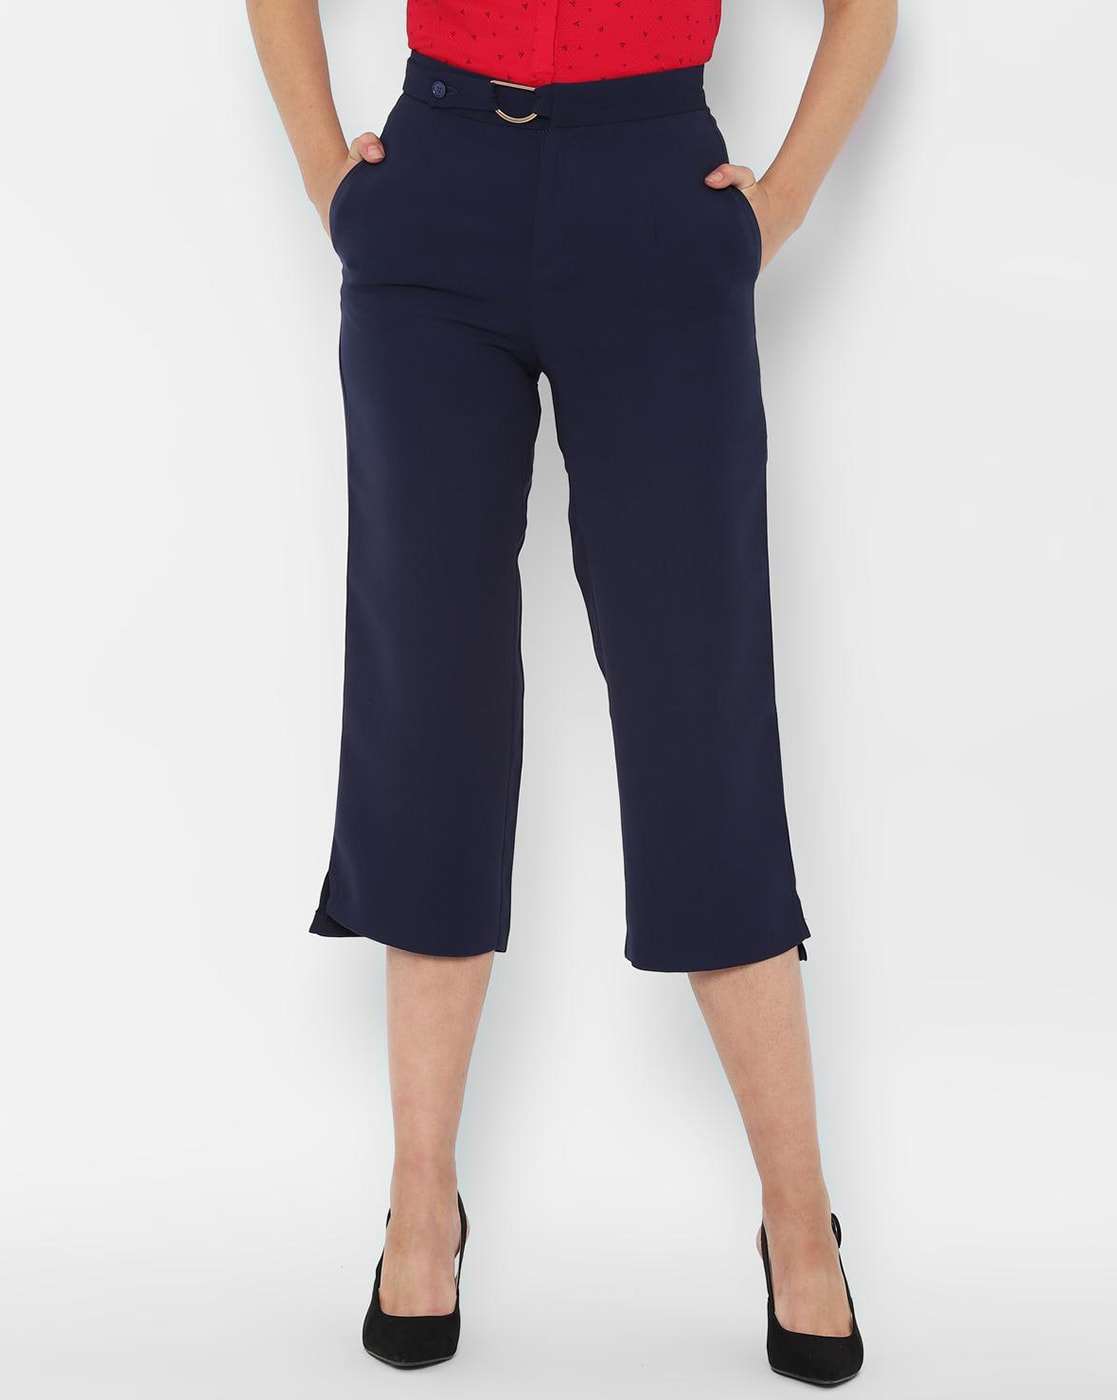 Discover 85+ knee length trousers best - in.duhocakina